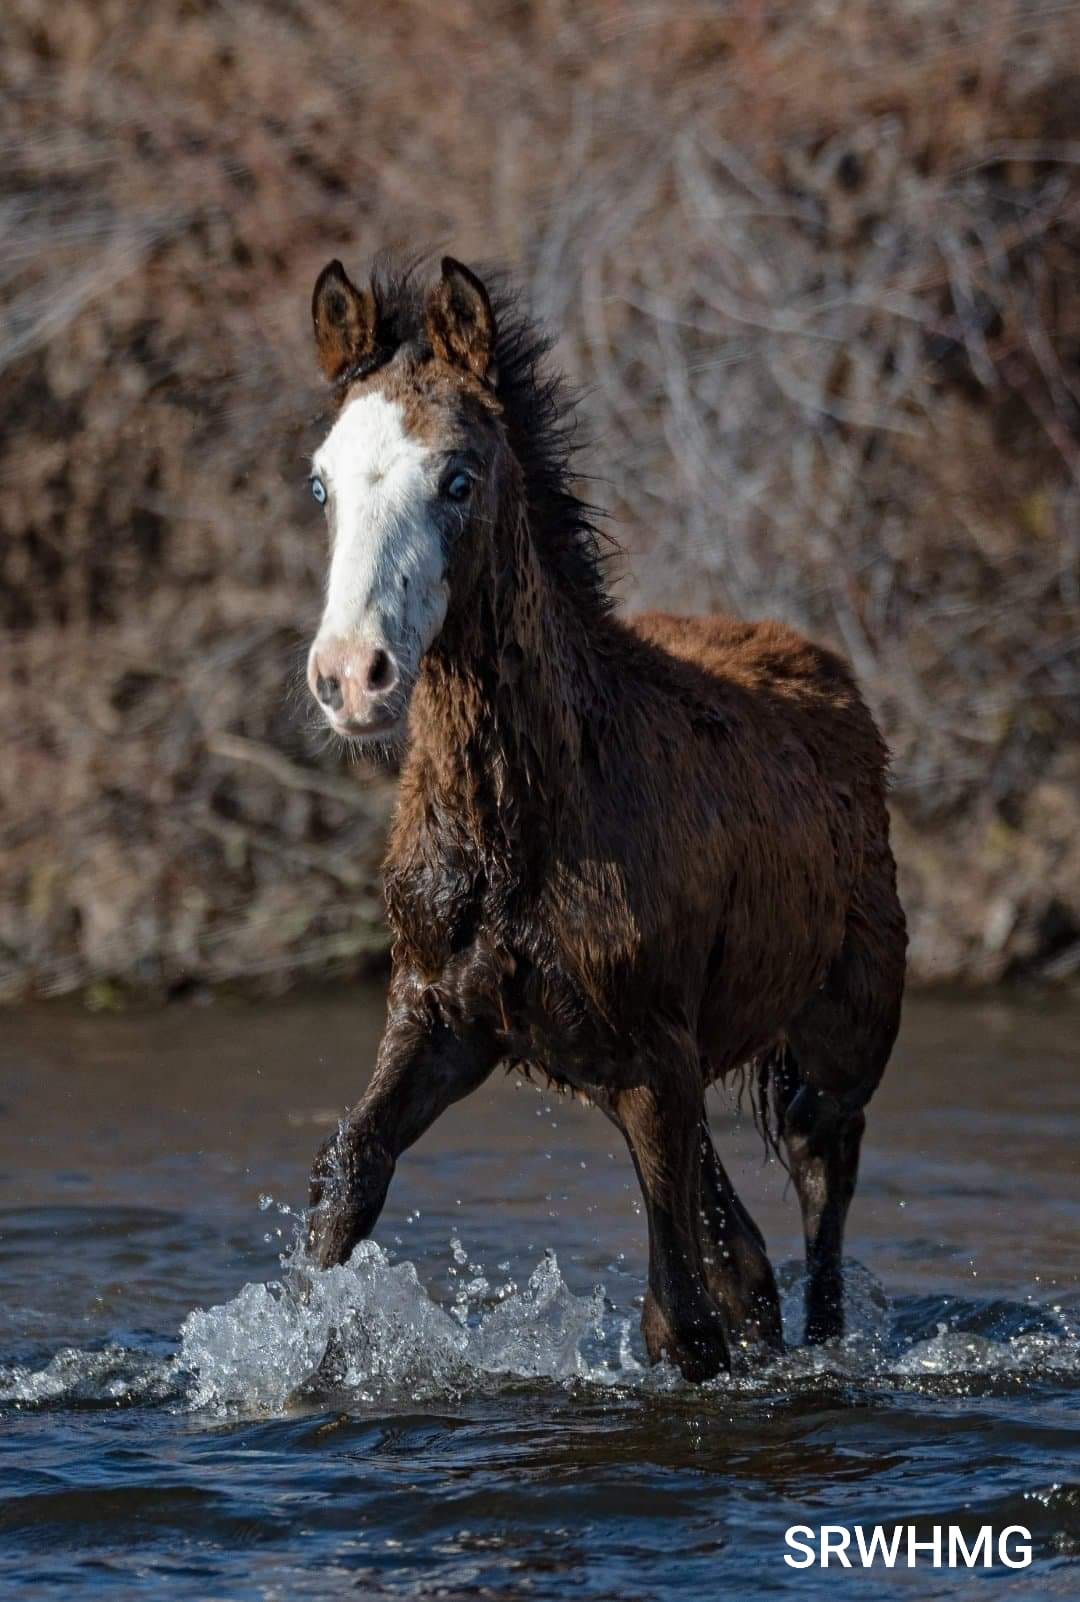 To all who believe in humane wild horse management, we love you